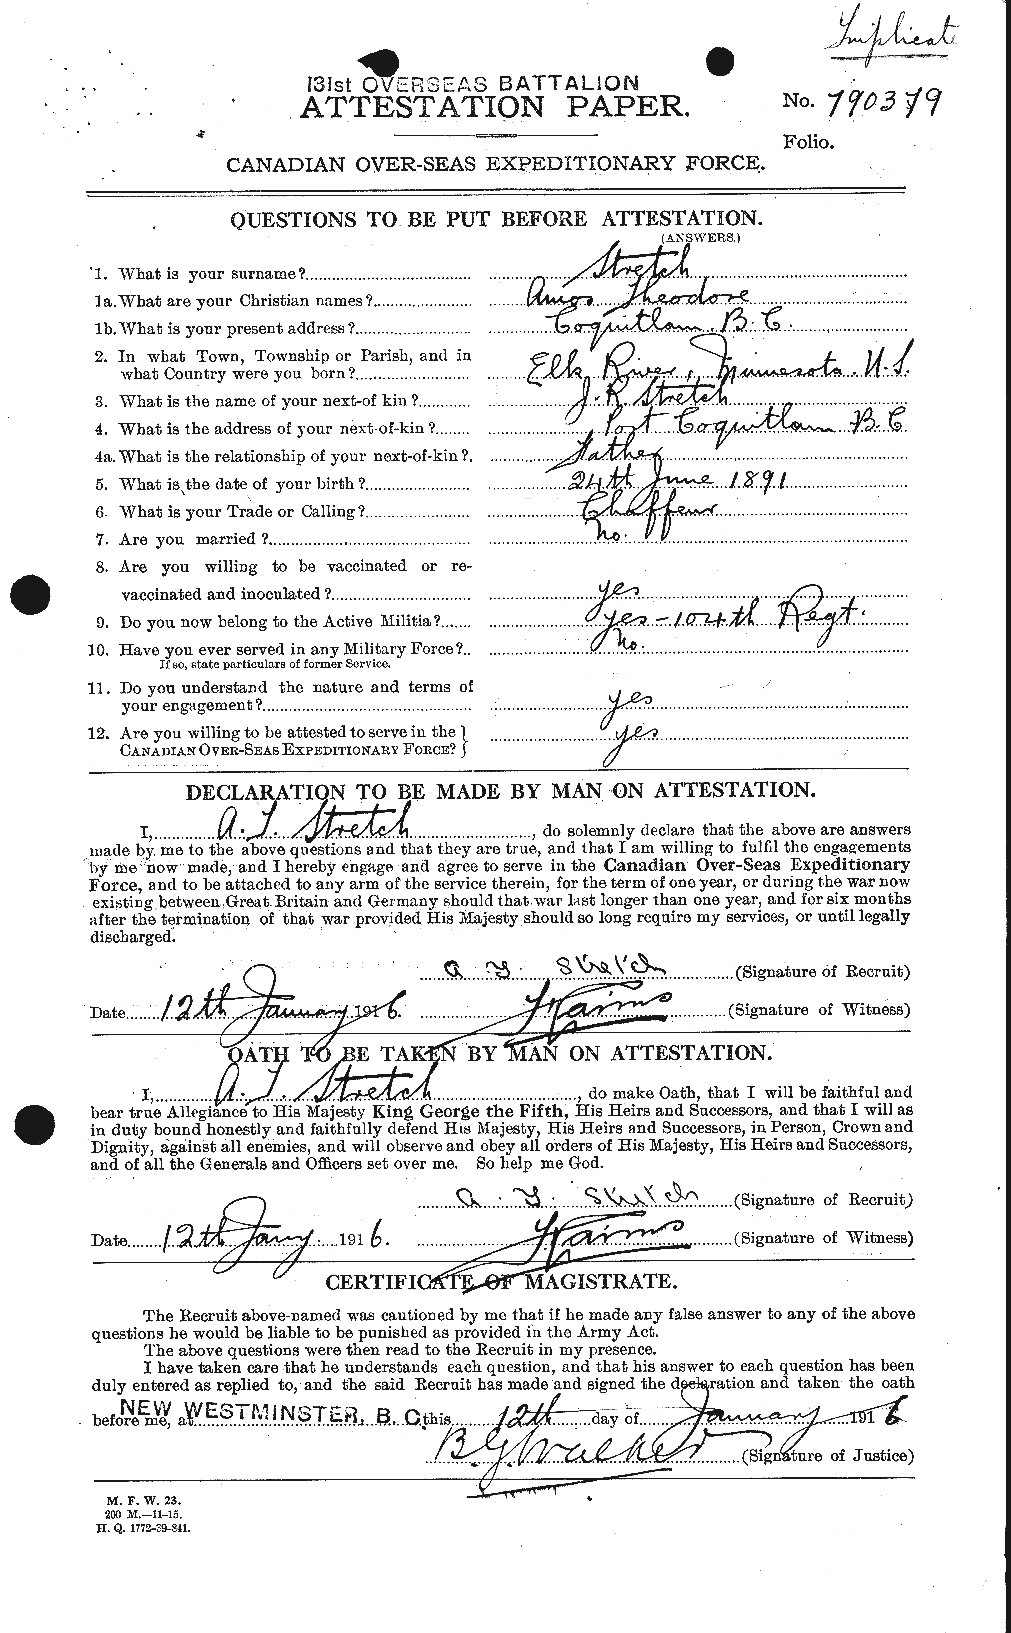 Personnel Records of the First World War - CEF 125138a